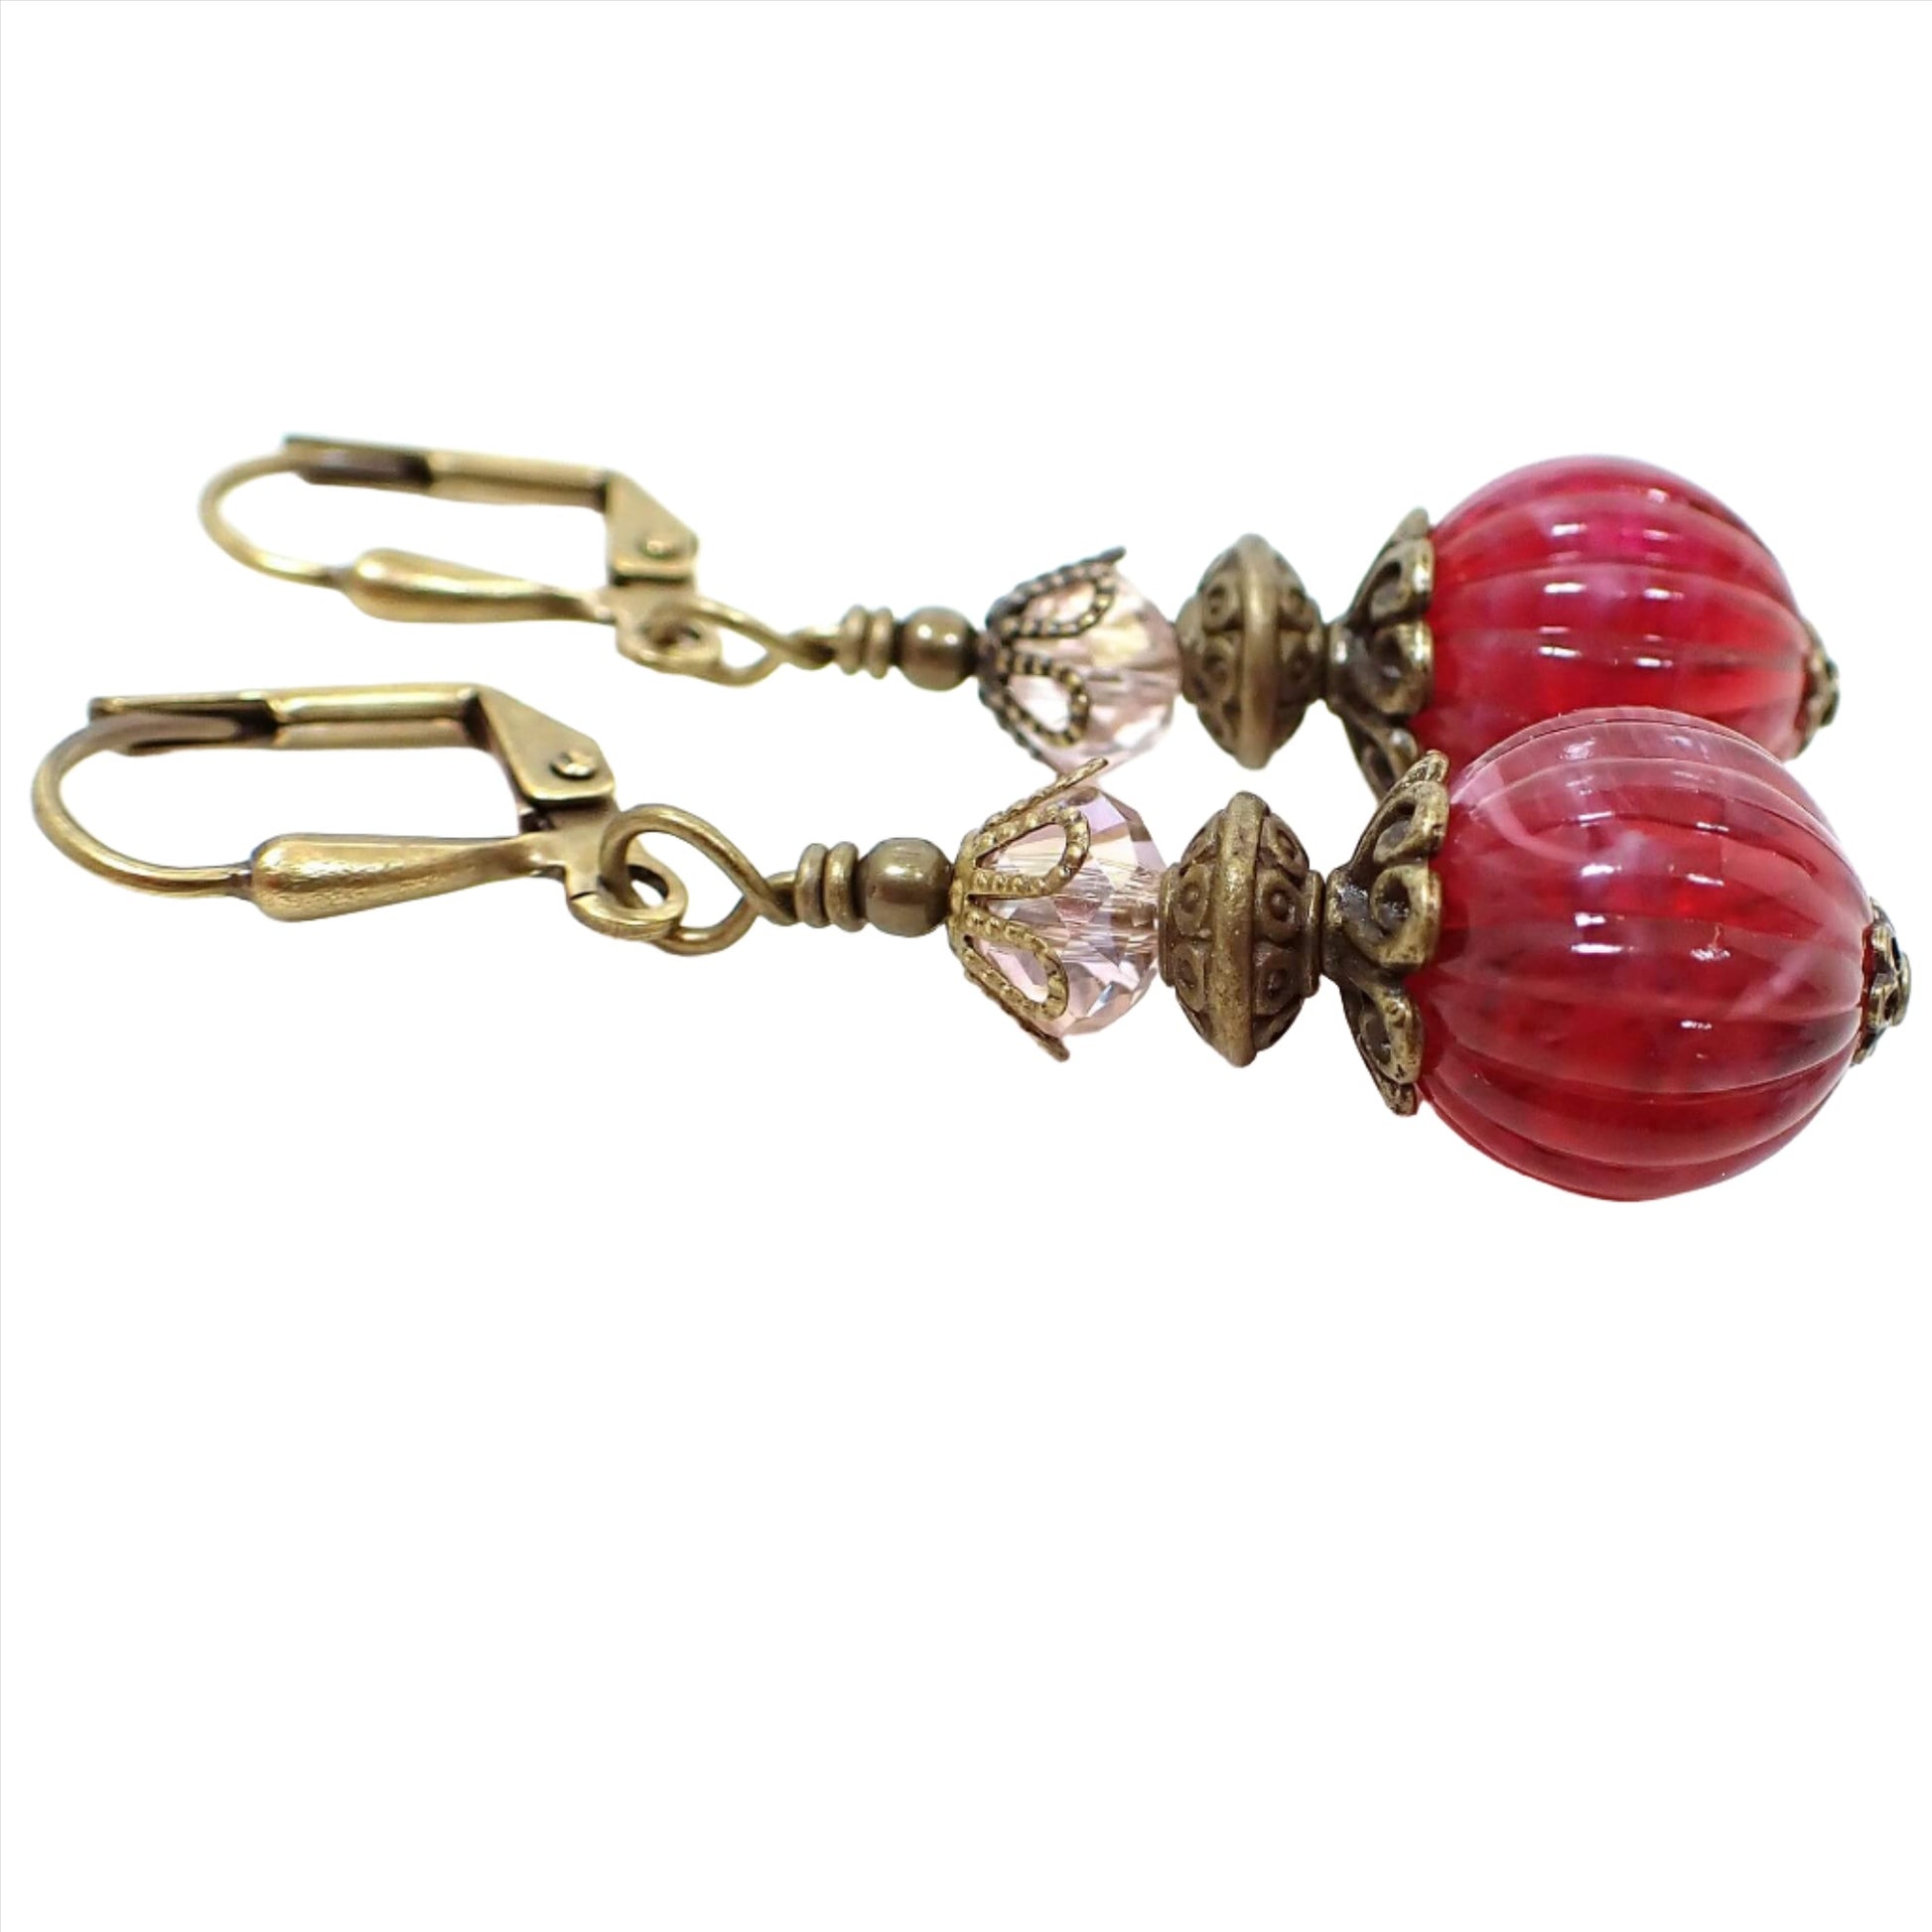 Side view of the handmade raspberry lucite drop earrings. The metal is antiqued brass in color. There is a very light pink faceted glass crystal bead at the top. The bottom lucite beads are round and corrugated with marbled swirls of pink and purple.